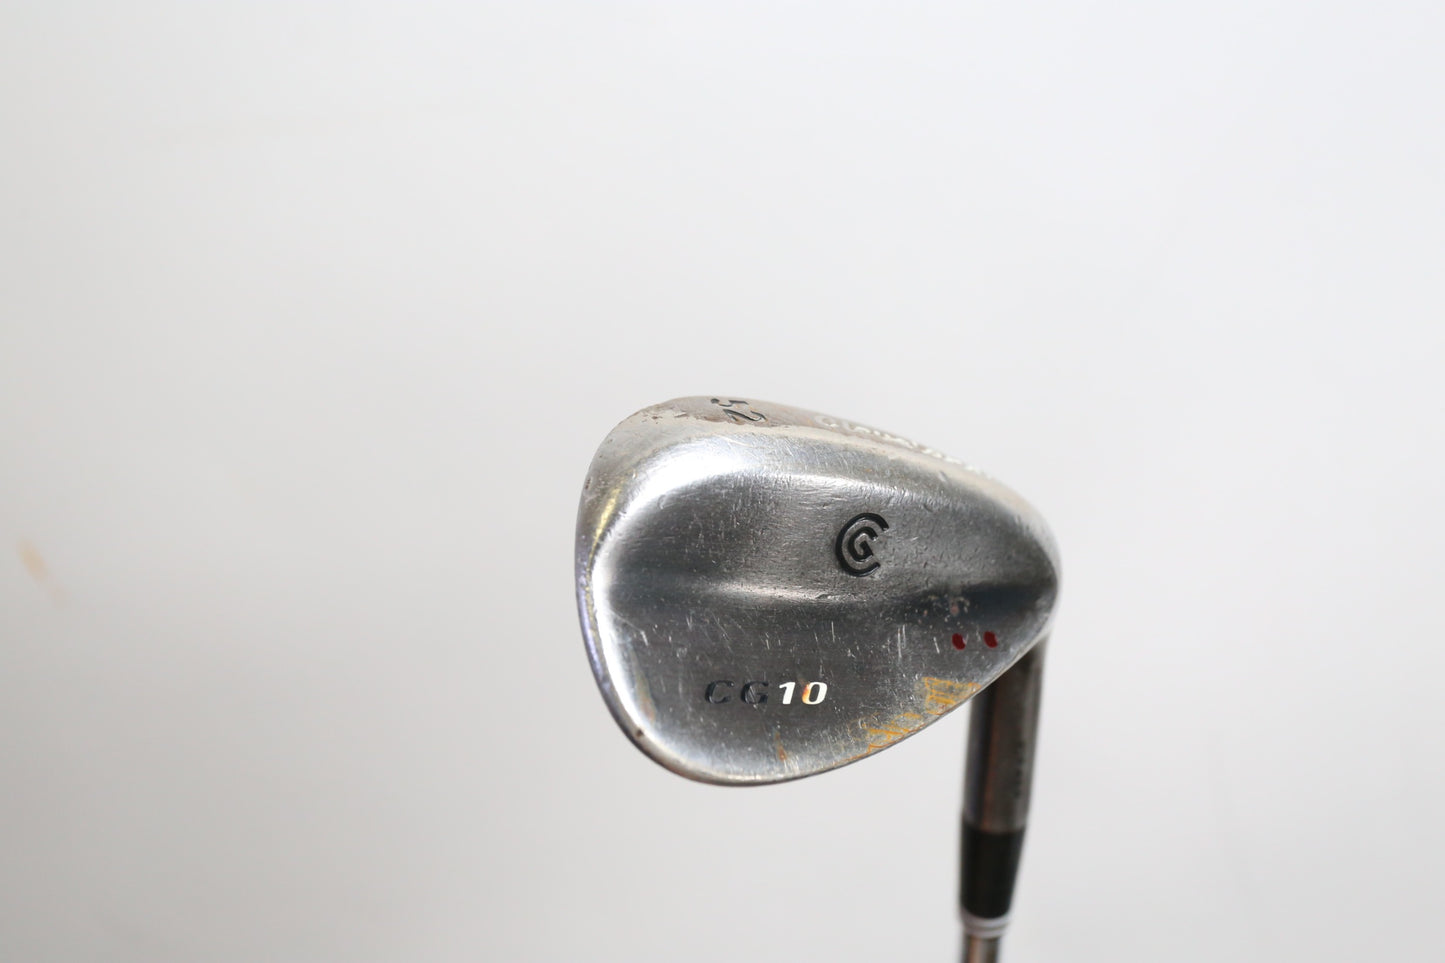 Used Cleveland CG10 Black Pearl Gap Wedge - Right-Handed - 52 Degrees - Stiff Flex